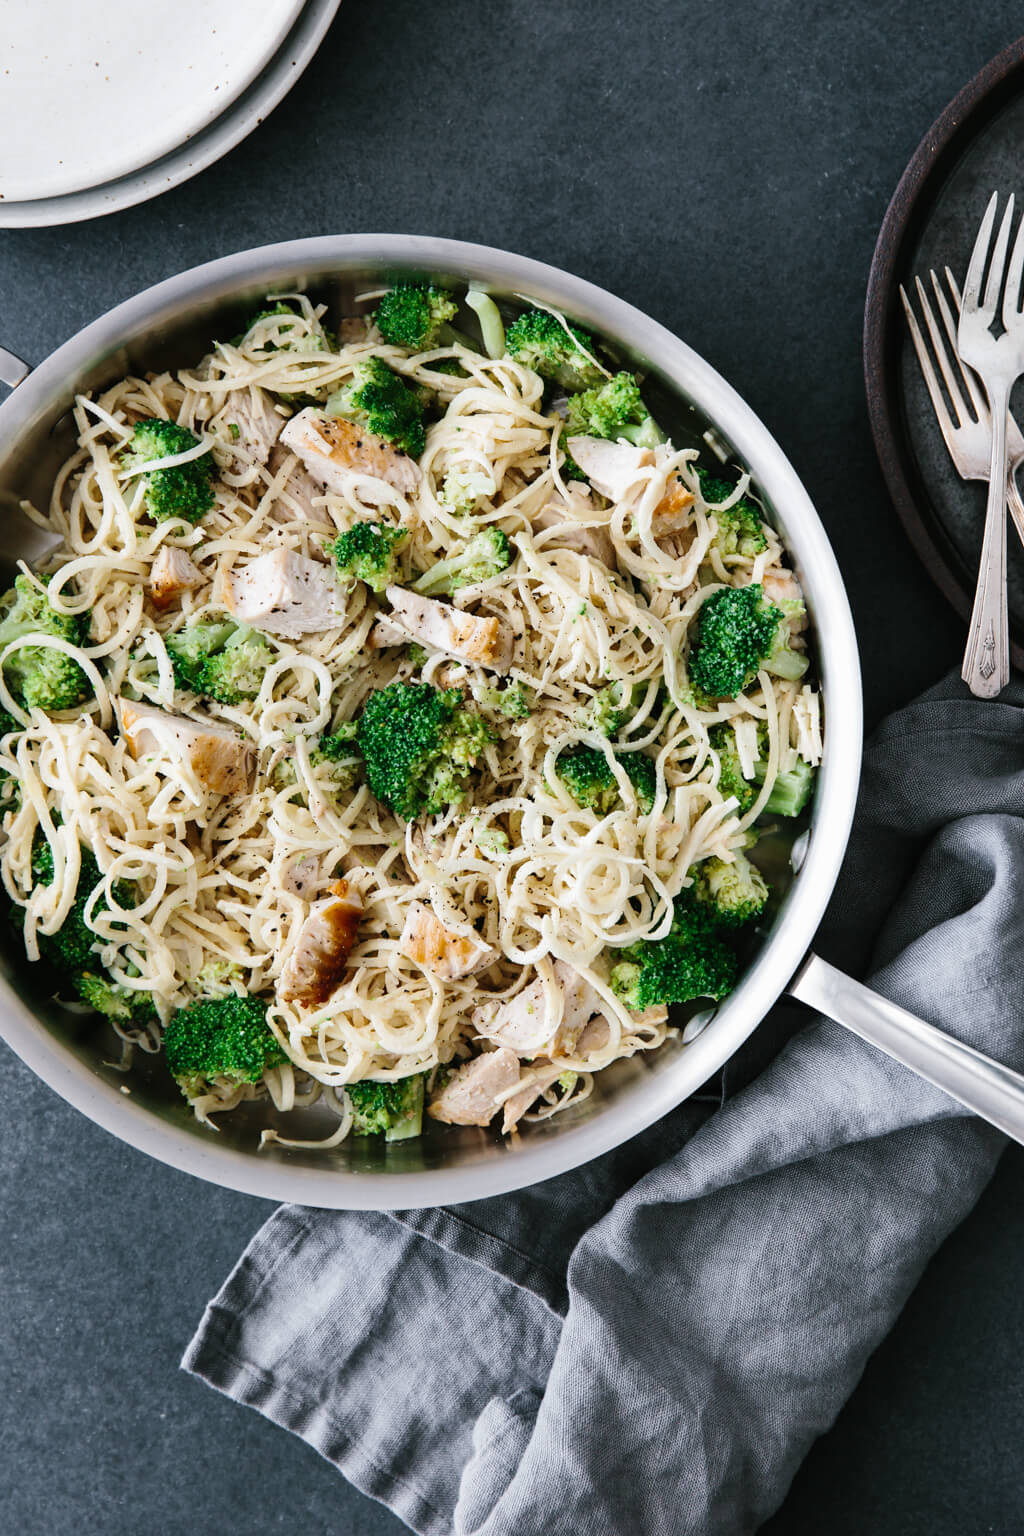 (gluten-free, dairy-free, paleo) This parsnip noodle chicken alfredo is 100% gluten-free and dairy-free. It's a healthier take on the classic chicken alfredo that's absolutely delicious.